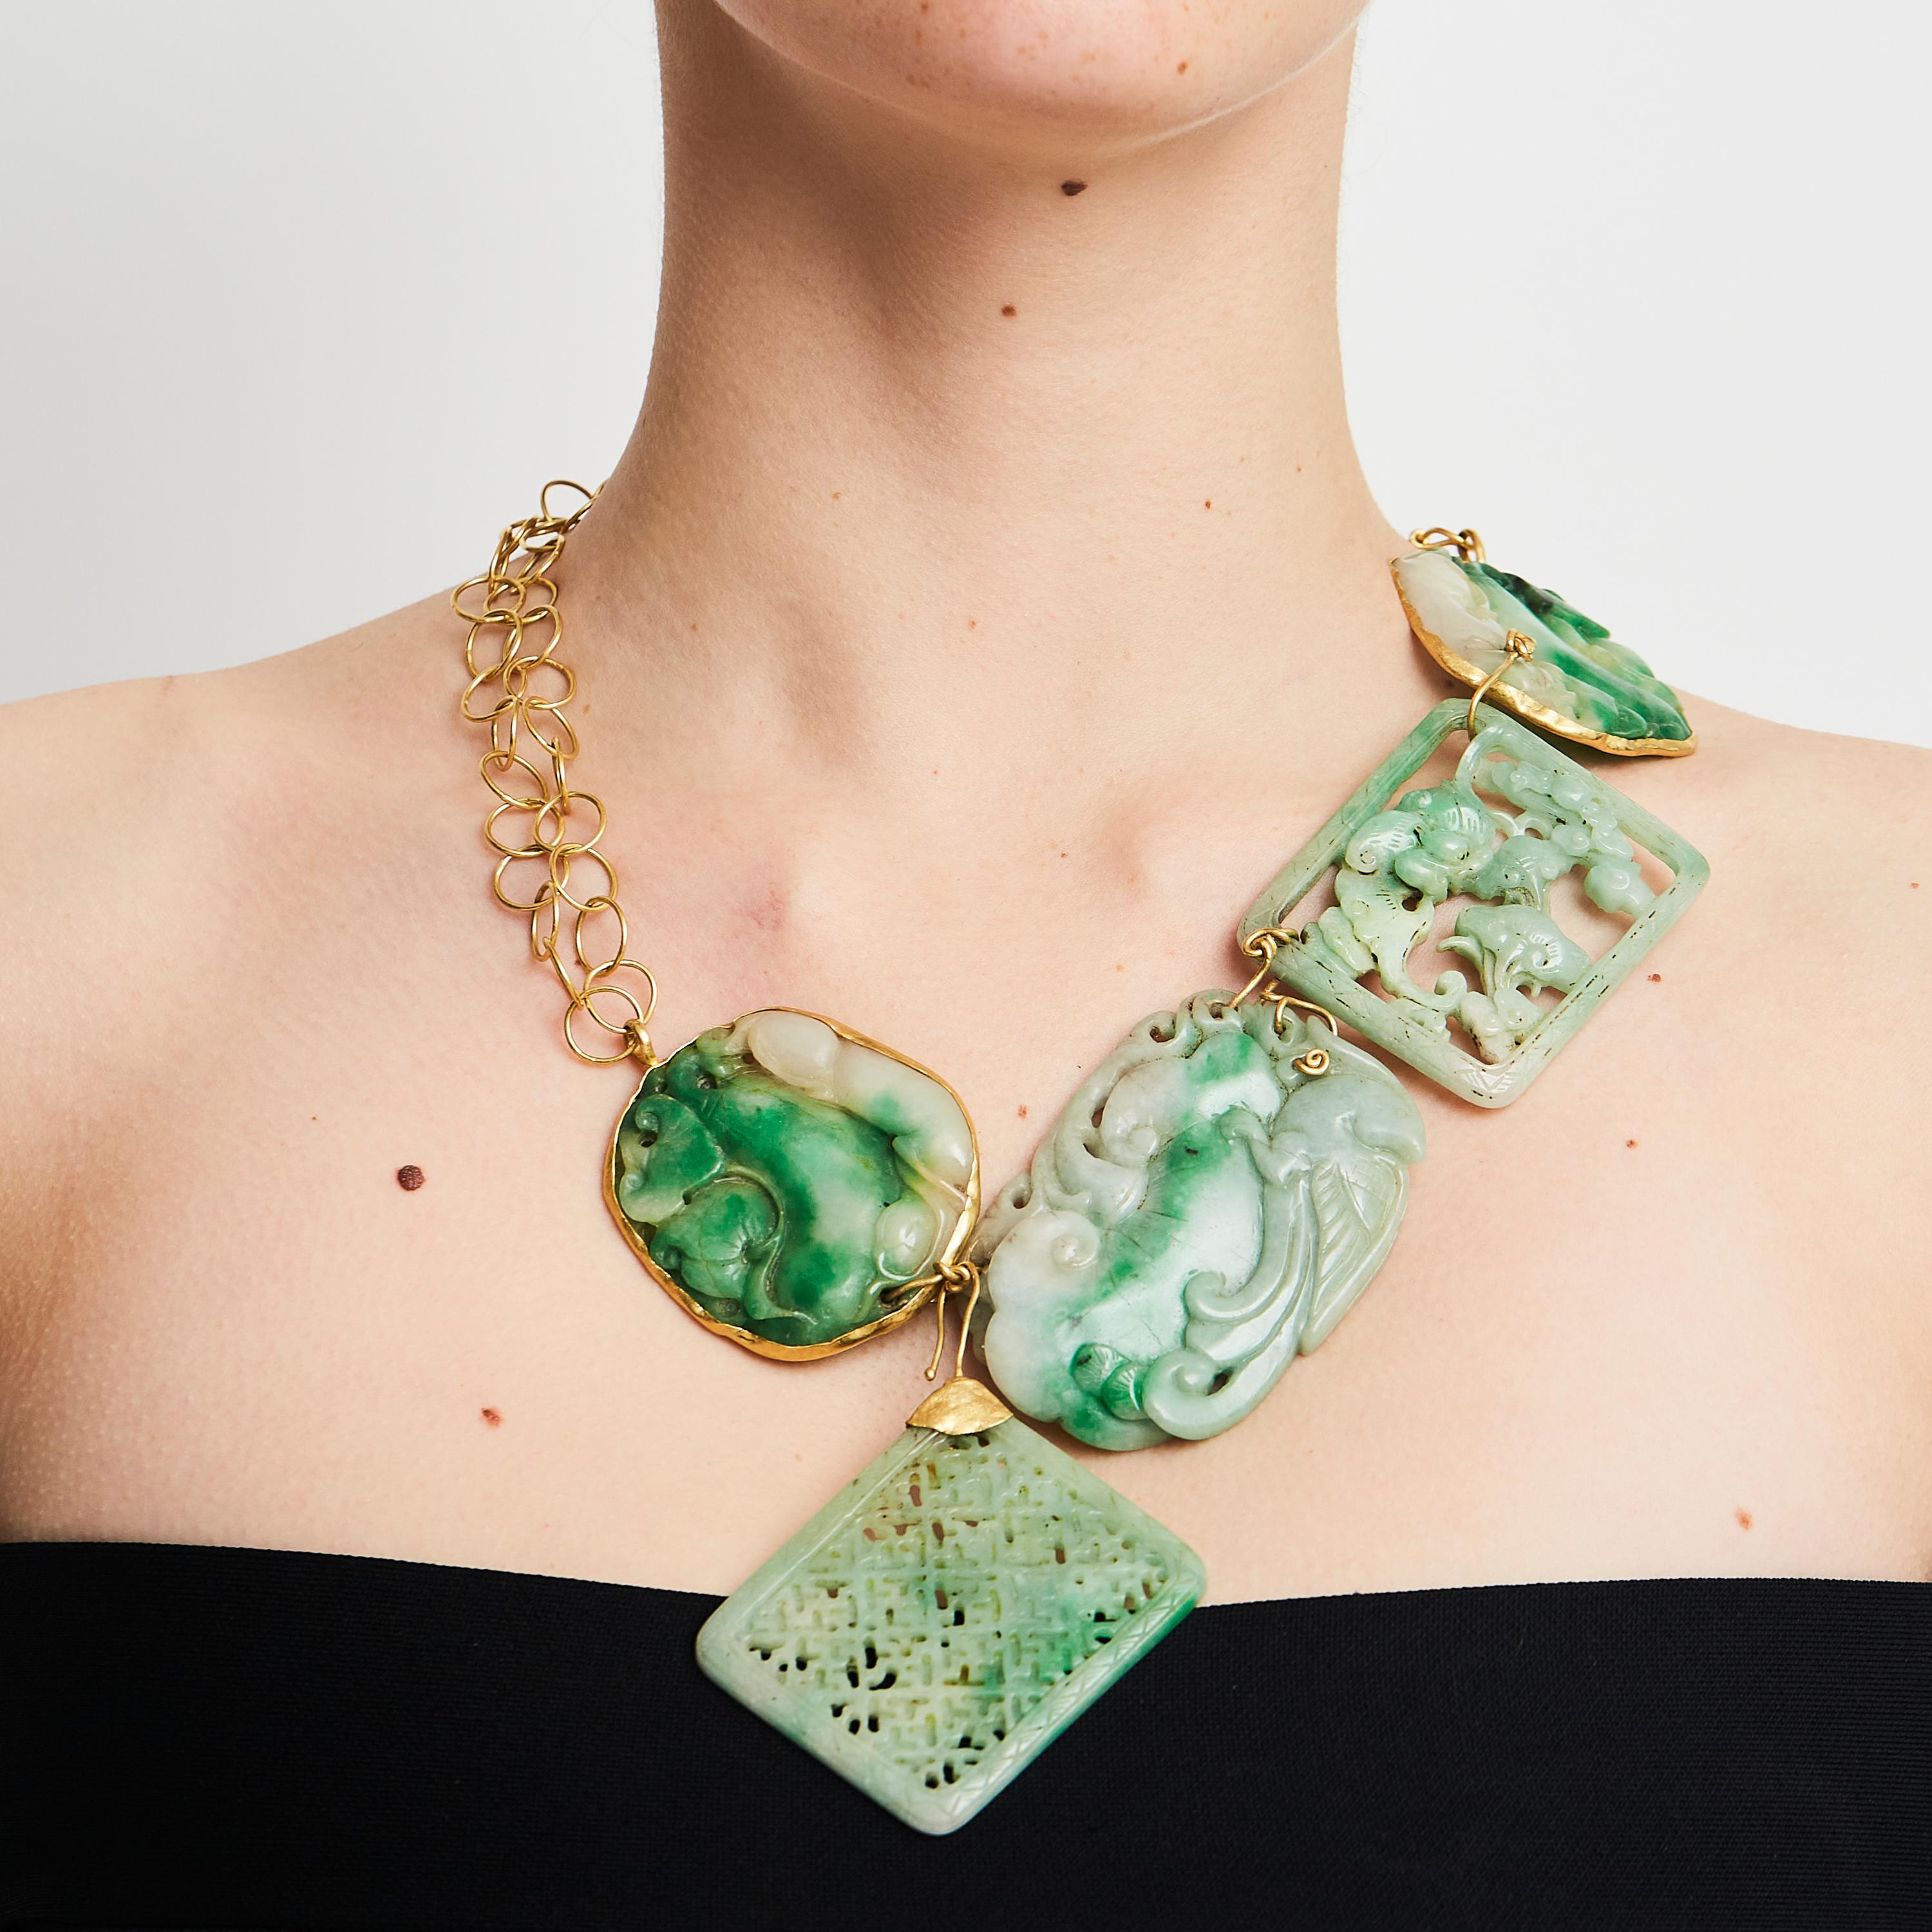 Striking in its colour and scale, this one-of-a-kind necklace was crafted by artist Ram Rijal, asked by Mimi Lipton to create a timeless piece. Hand made links of 22 karat gold, reflect the unique cuts of five large pieces of Chinese jade. 

Few